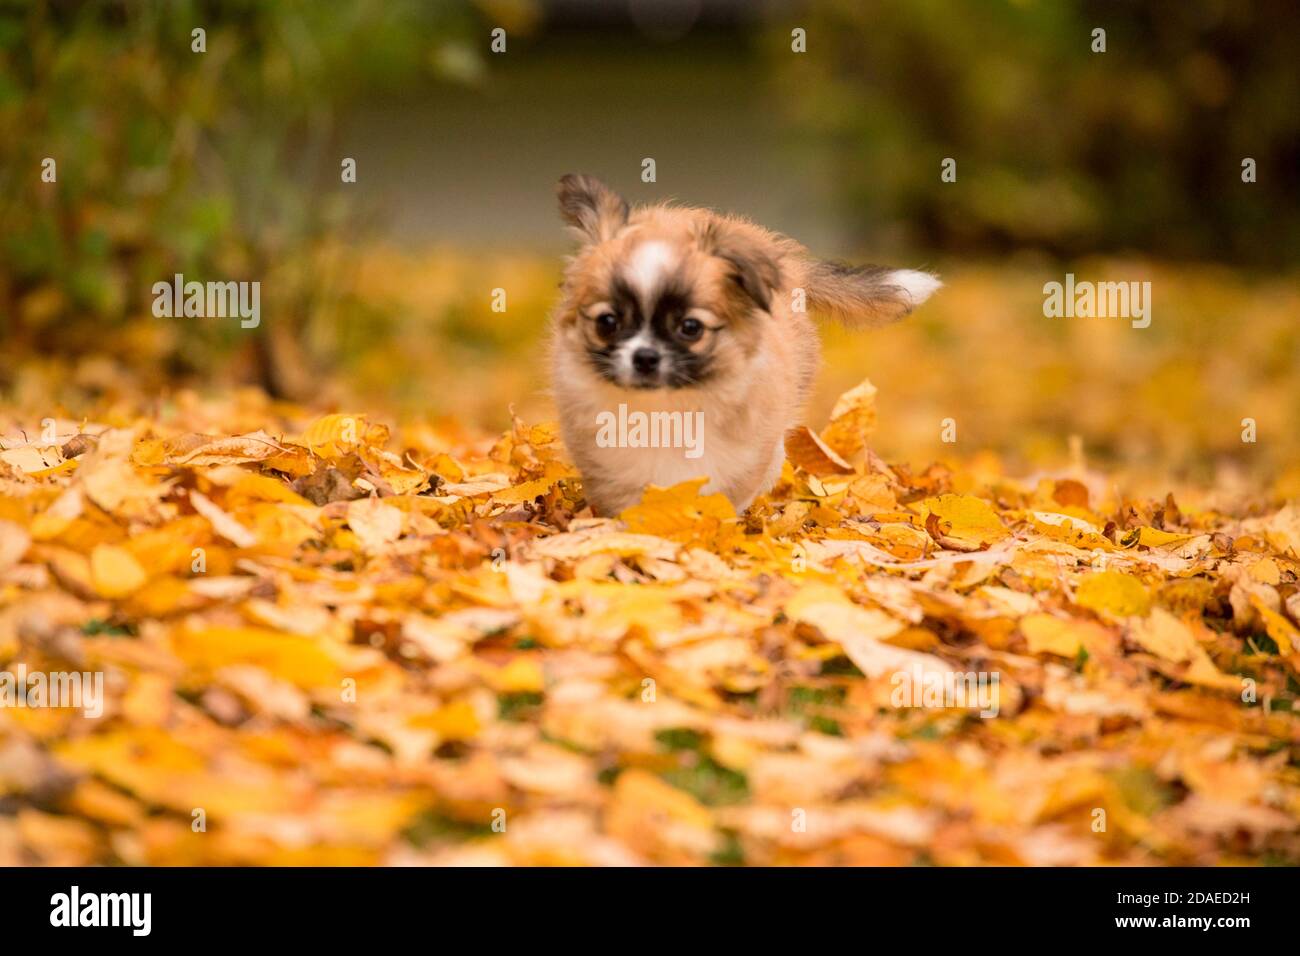 Chihuahua puppy, longhaired, autumn scene, garden, Finland Stock Photo